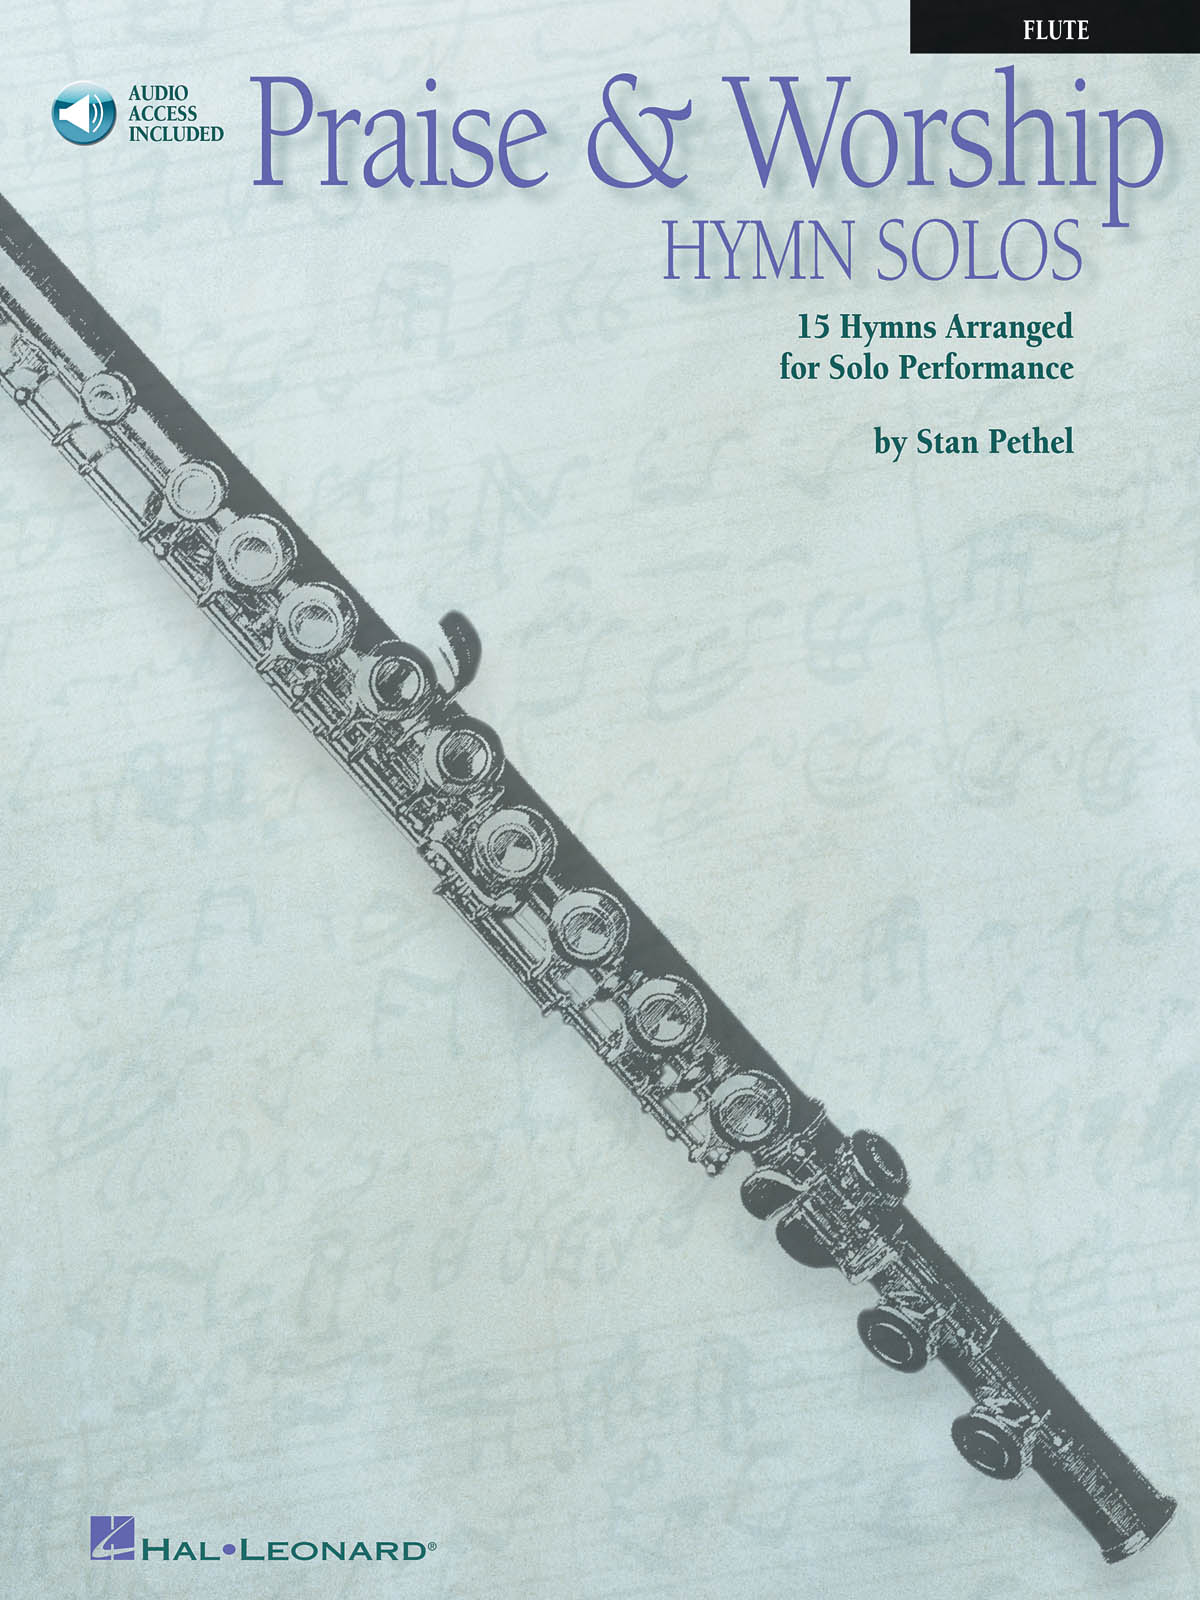 Praise And Worship Hymn Solos – Flute